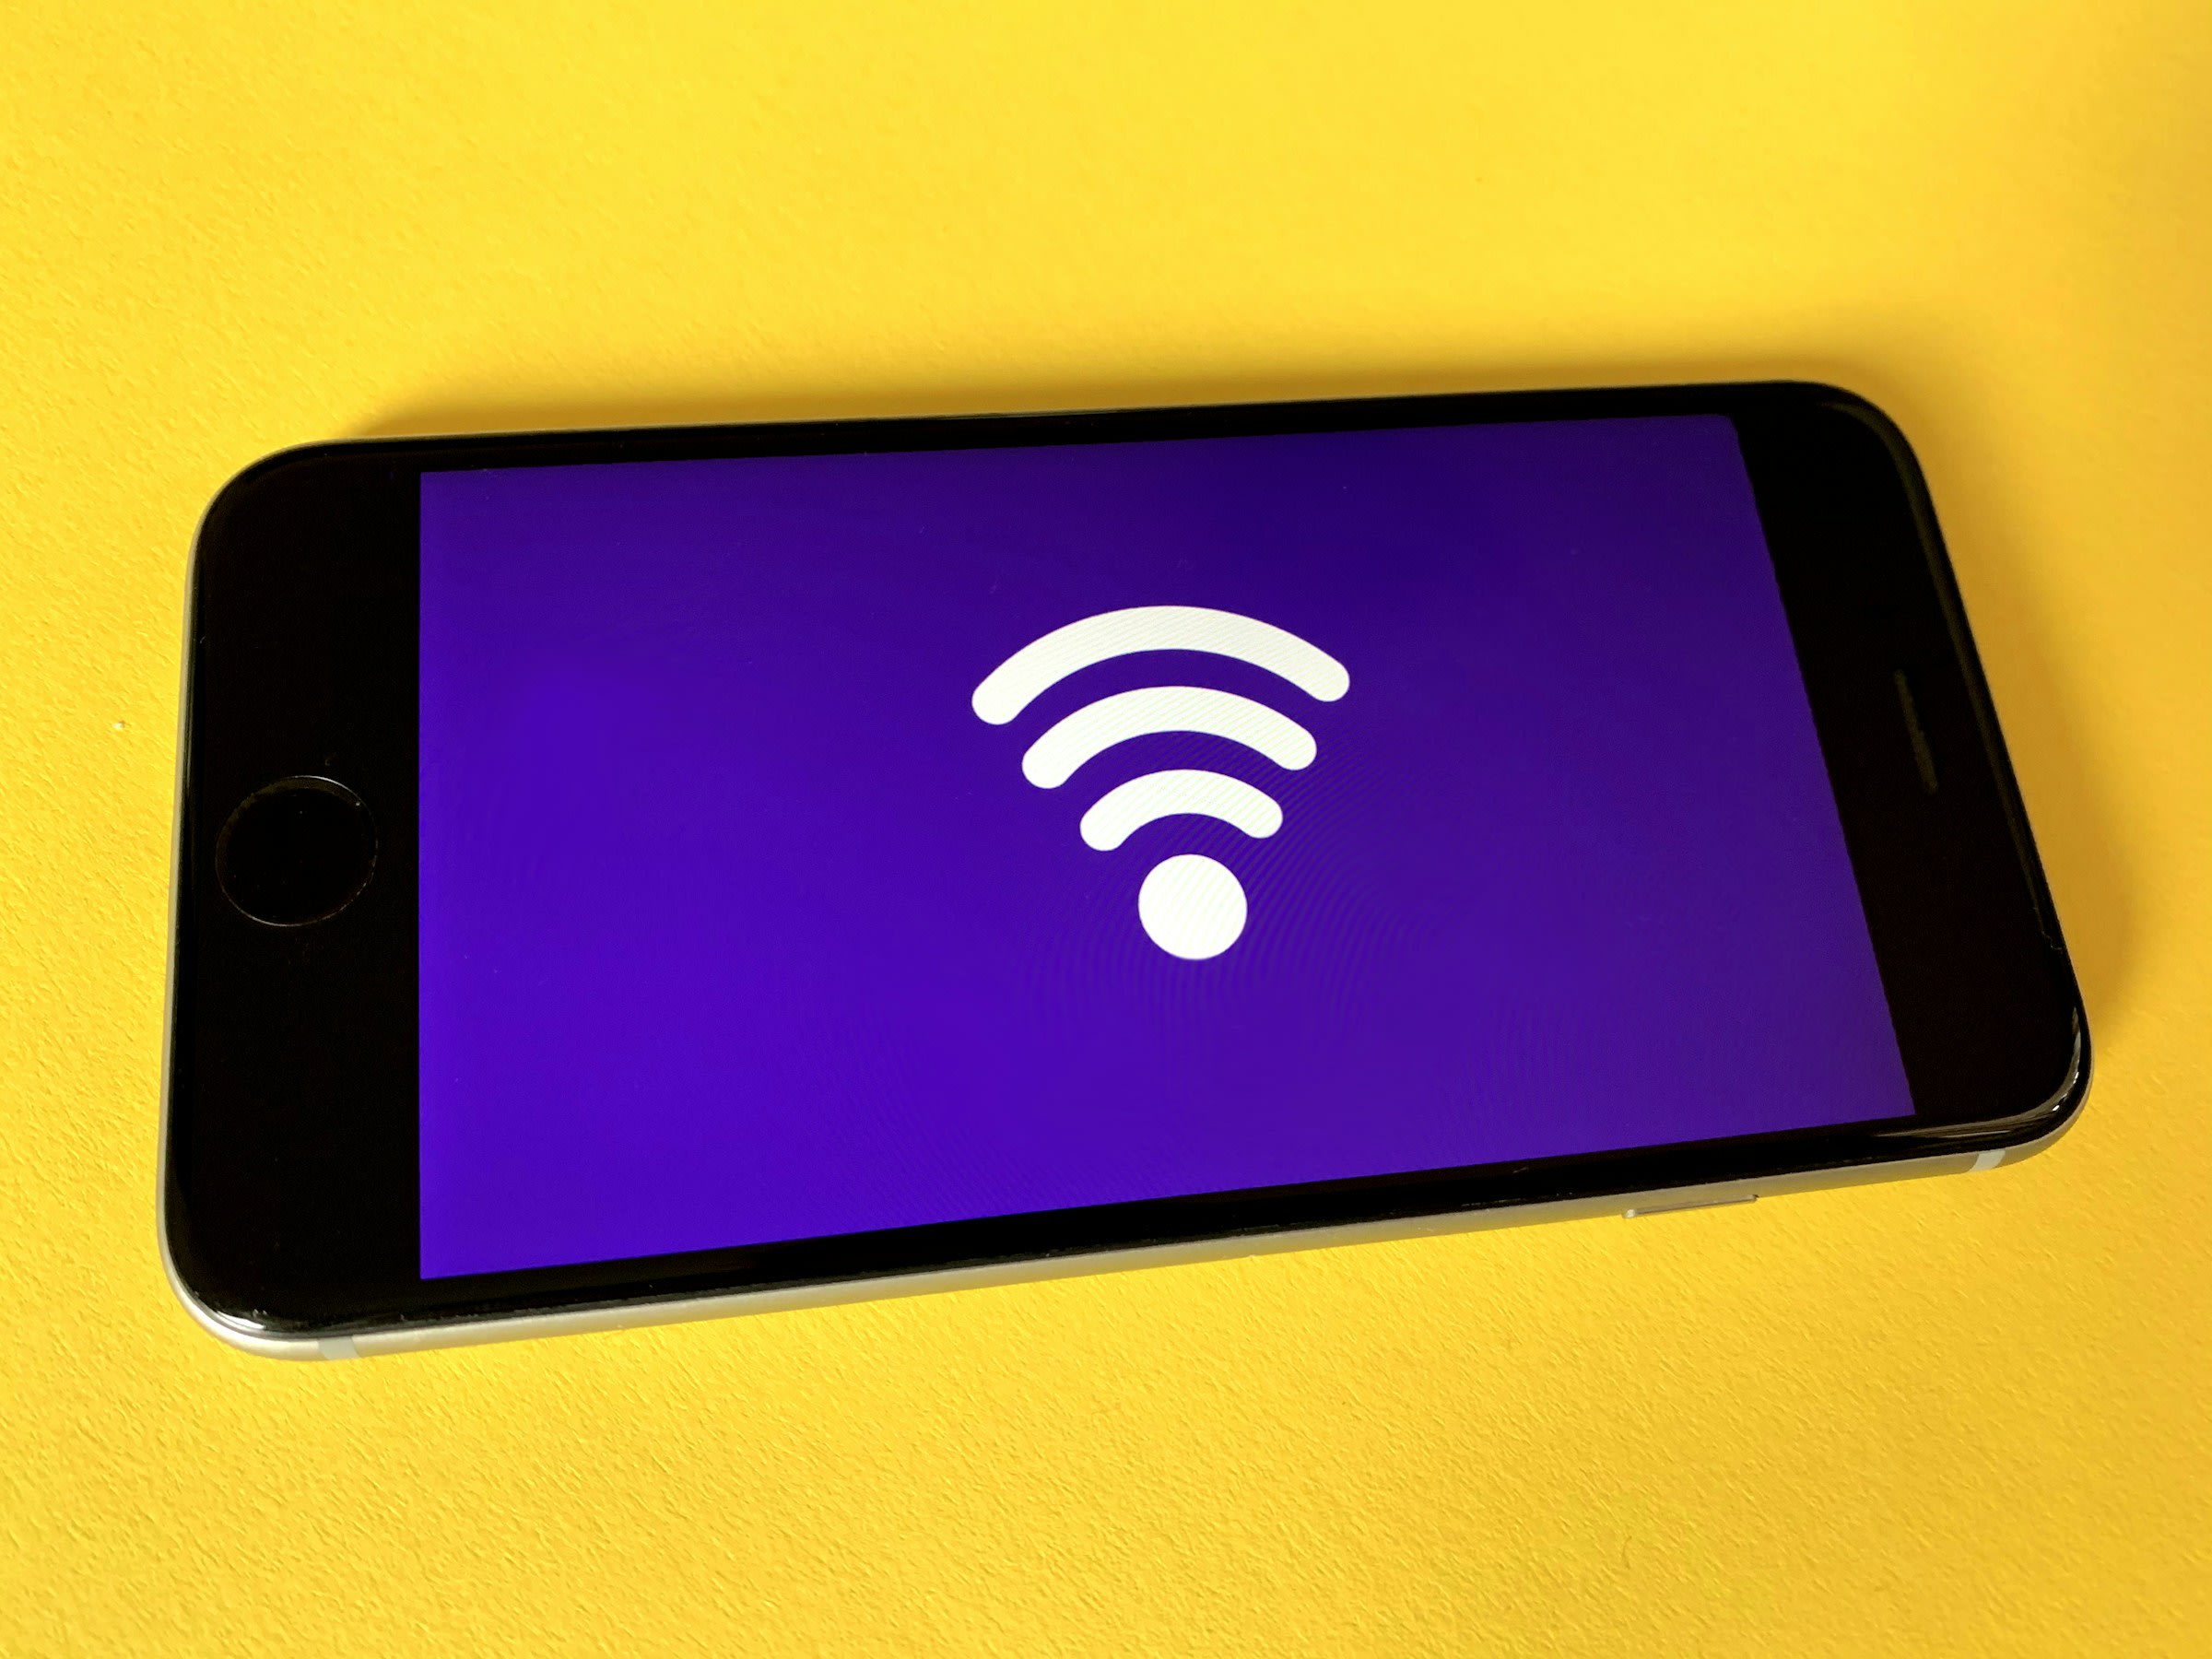 An image of a smartphone with a WiFi symbol on its screen on a yellow surface.